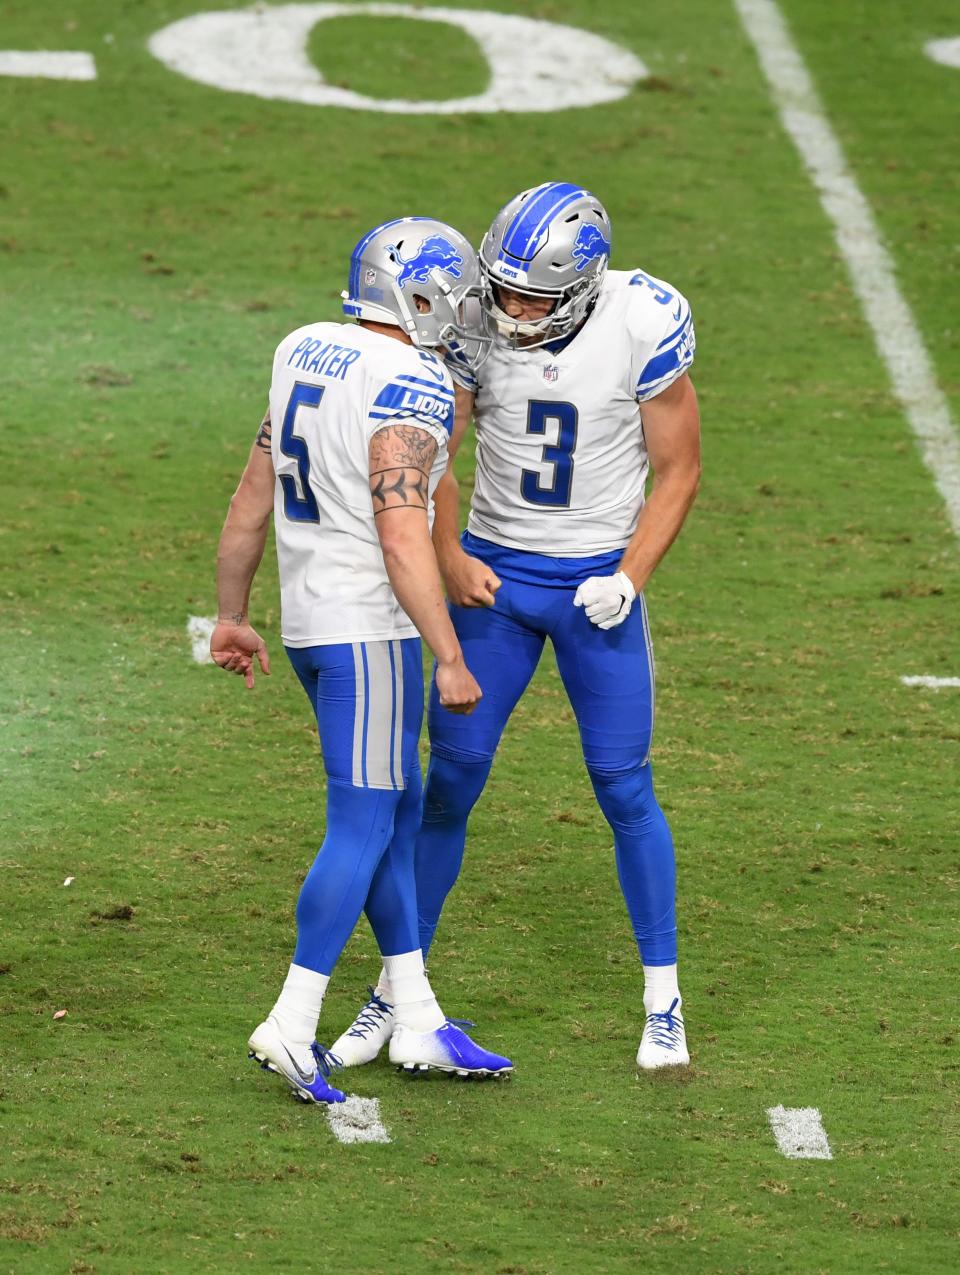 Detroit Lions kicker Matt Prater celebrates with punter/holder Jack Fox after kicking the winning 39-yard field goal against the Arizona Cardinals during the fourth quarter at State Farm Stadium on Sept. 27, 2020 in Glendale, Arizona. Lions won 26-23.